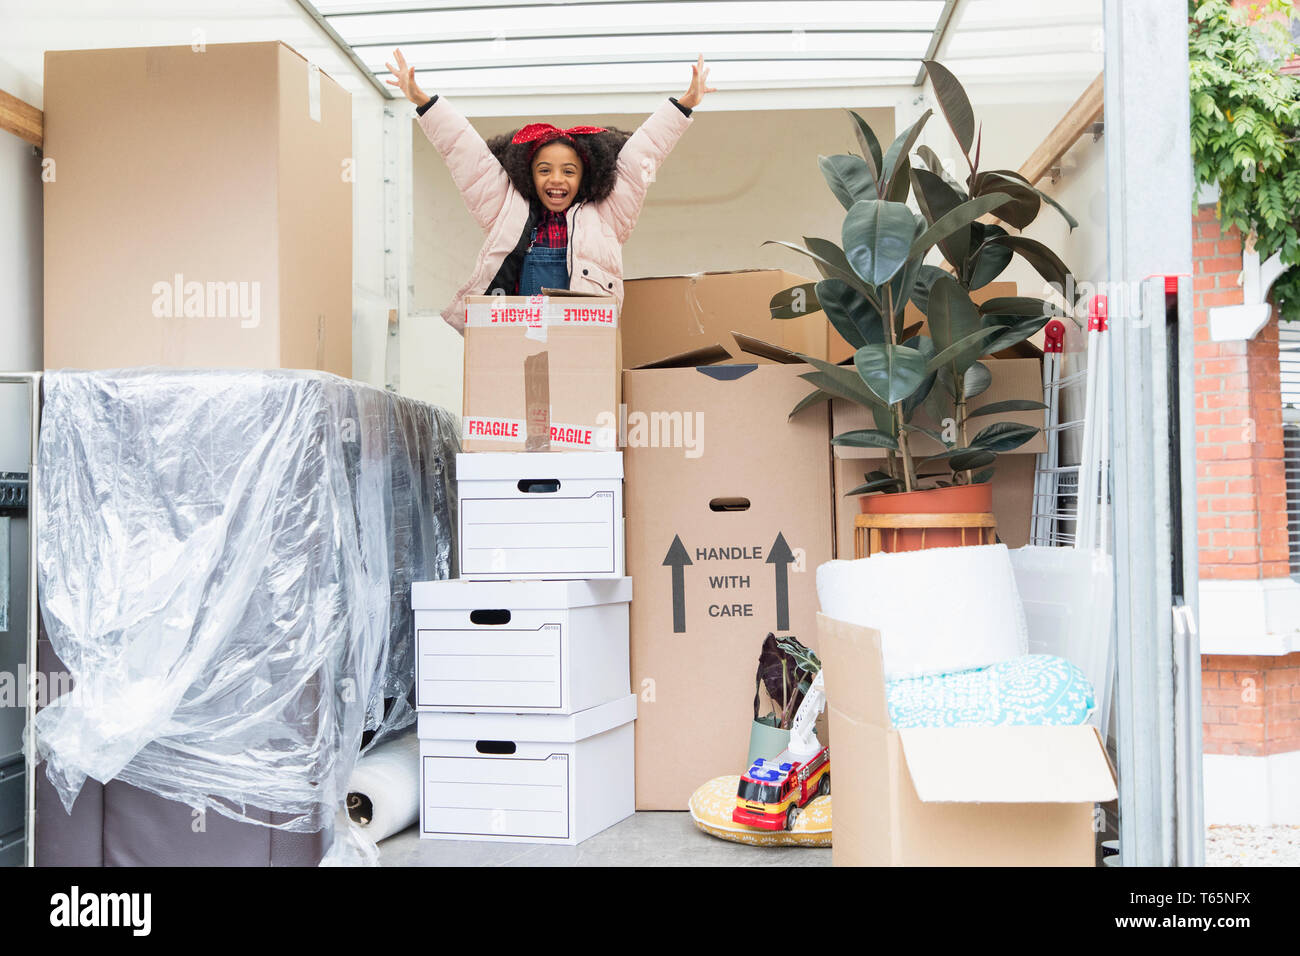 Portrait playful girl jumping up from behind cardboard boxes in moving van Stock Photo